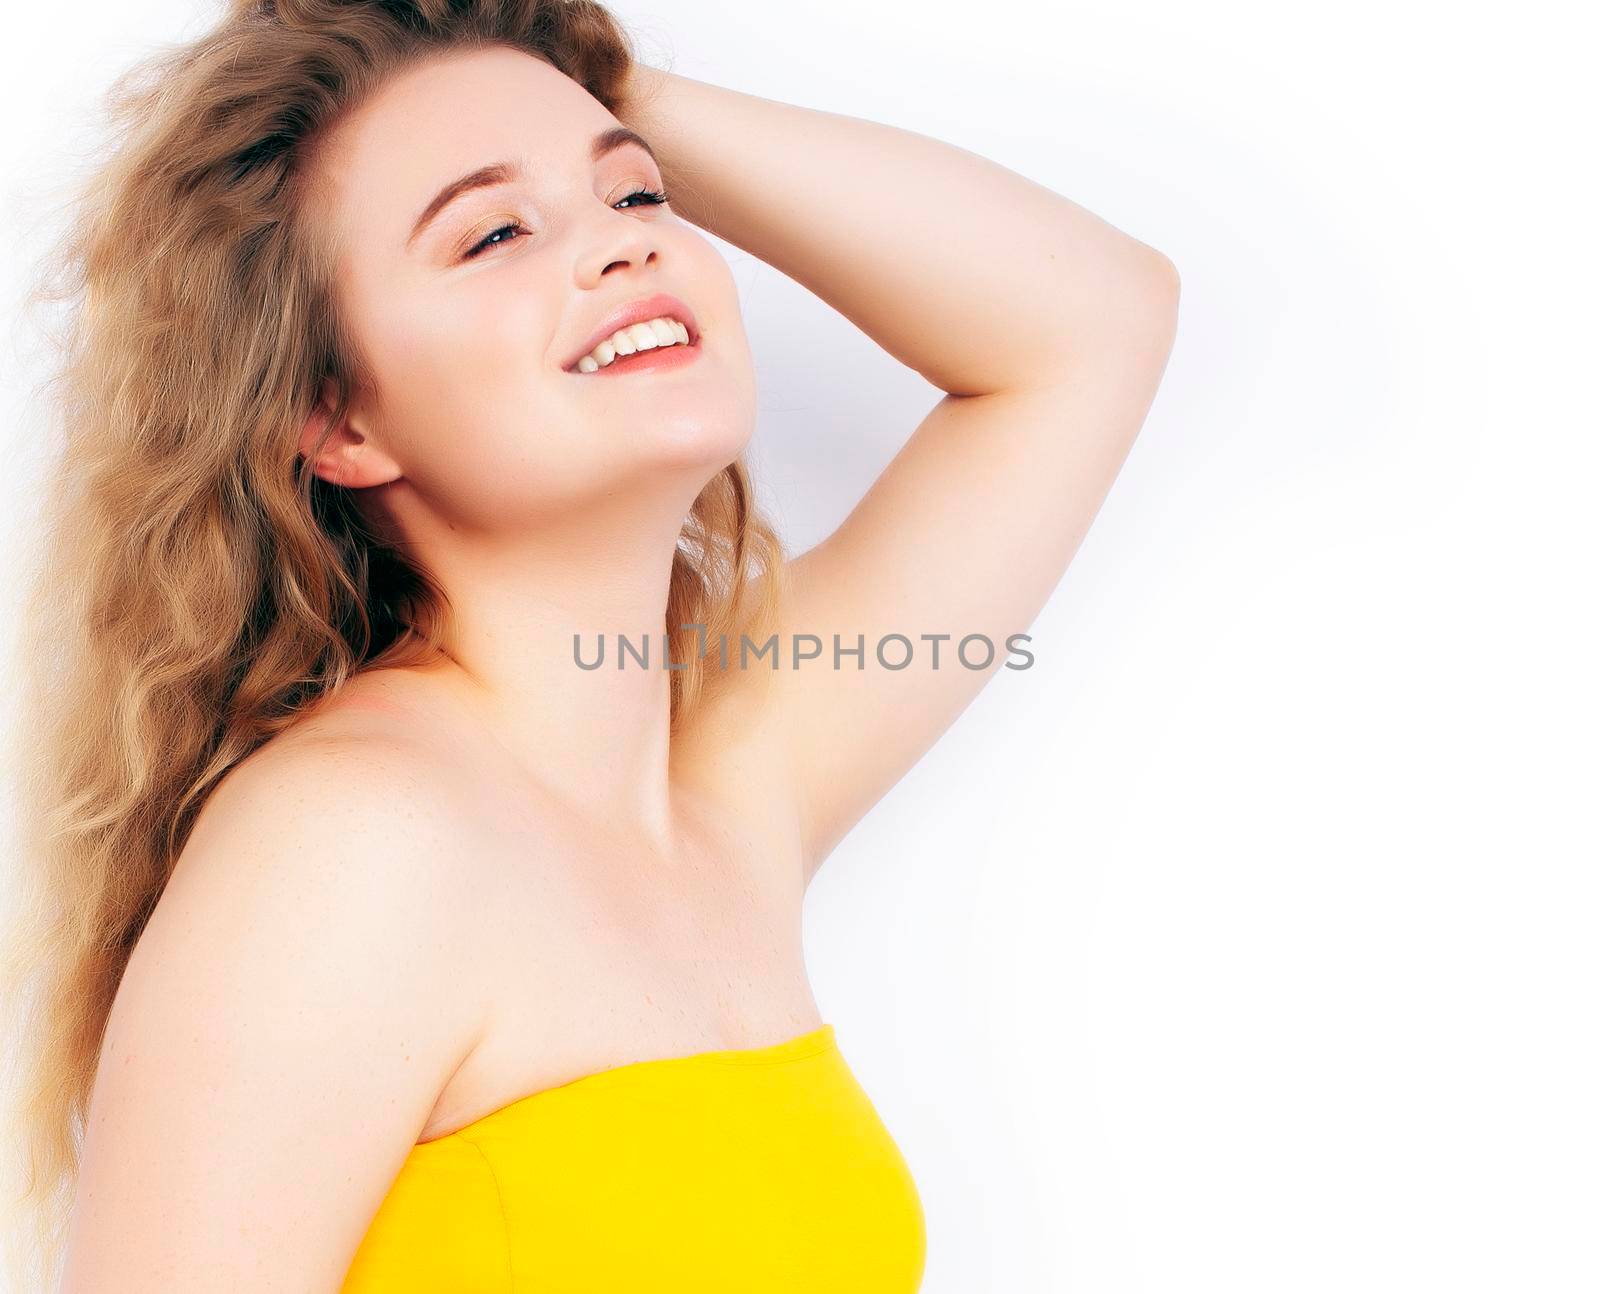 oung pretty blond girl posing happy smiling on white background isolated, lifestyle people concept close up